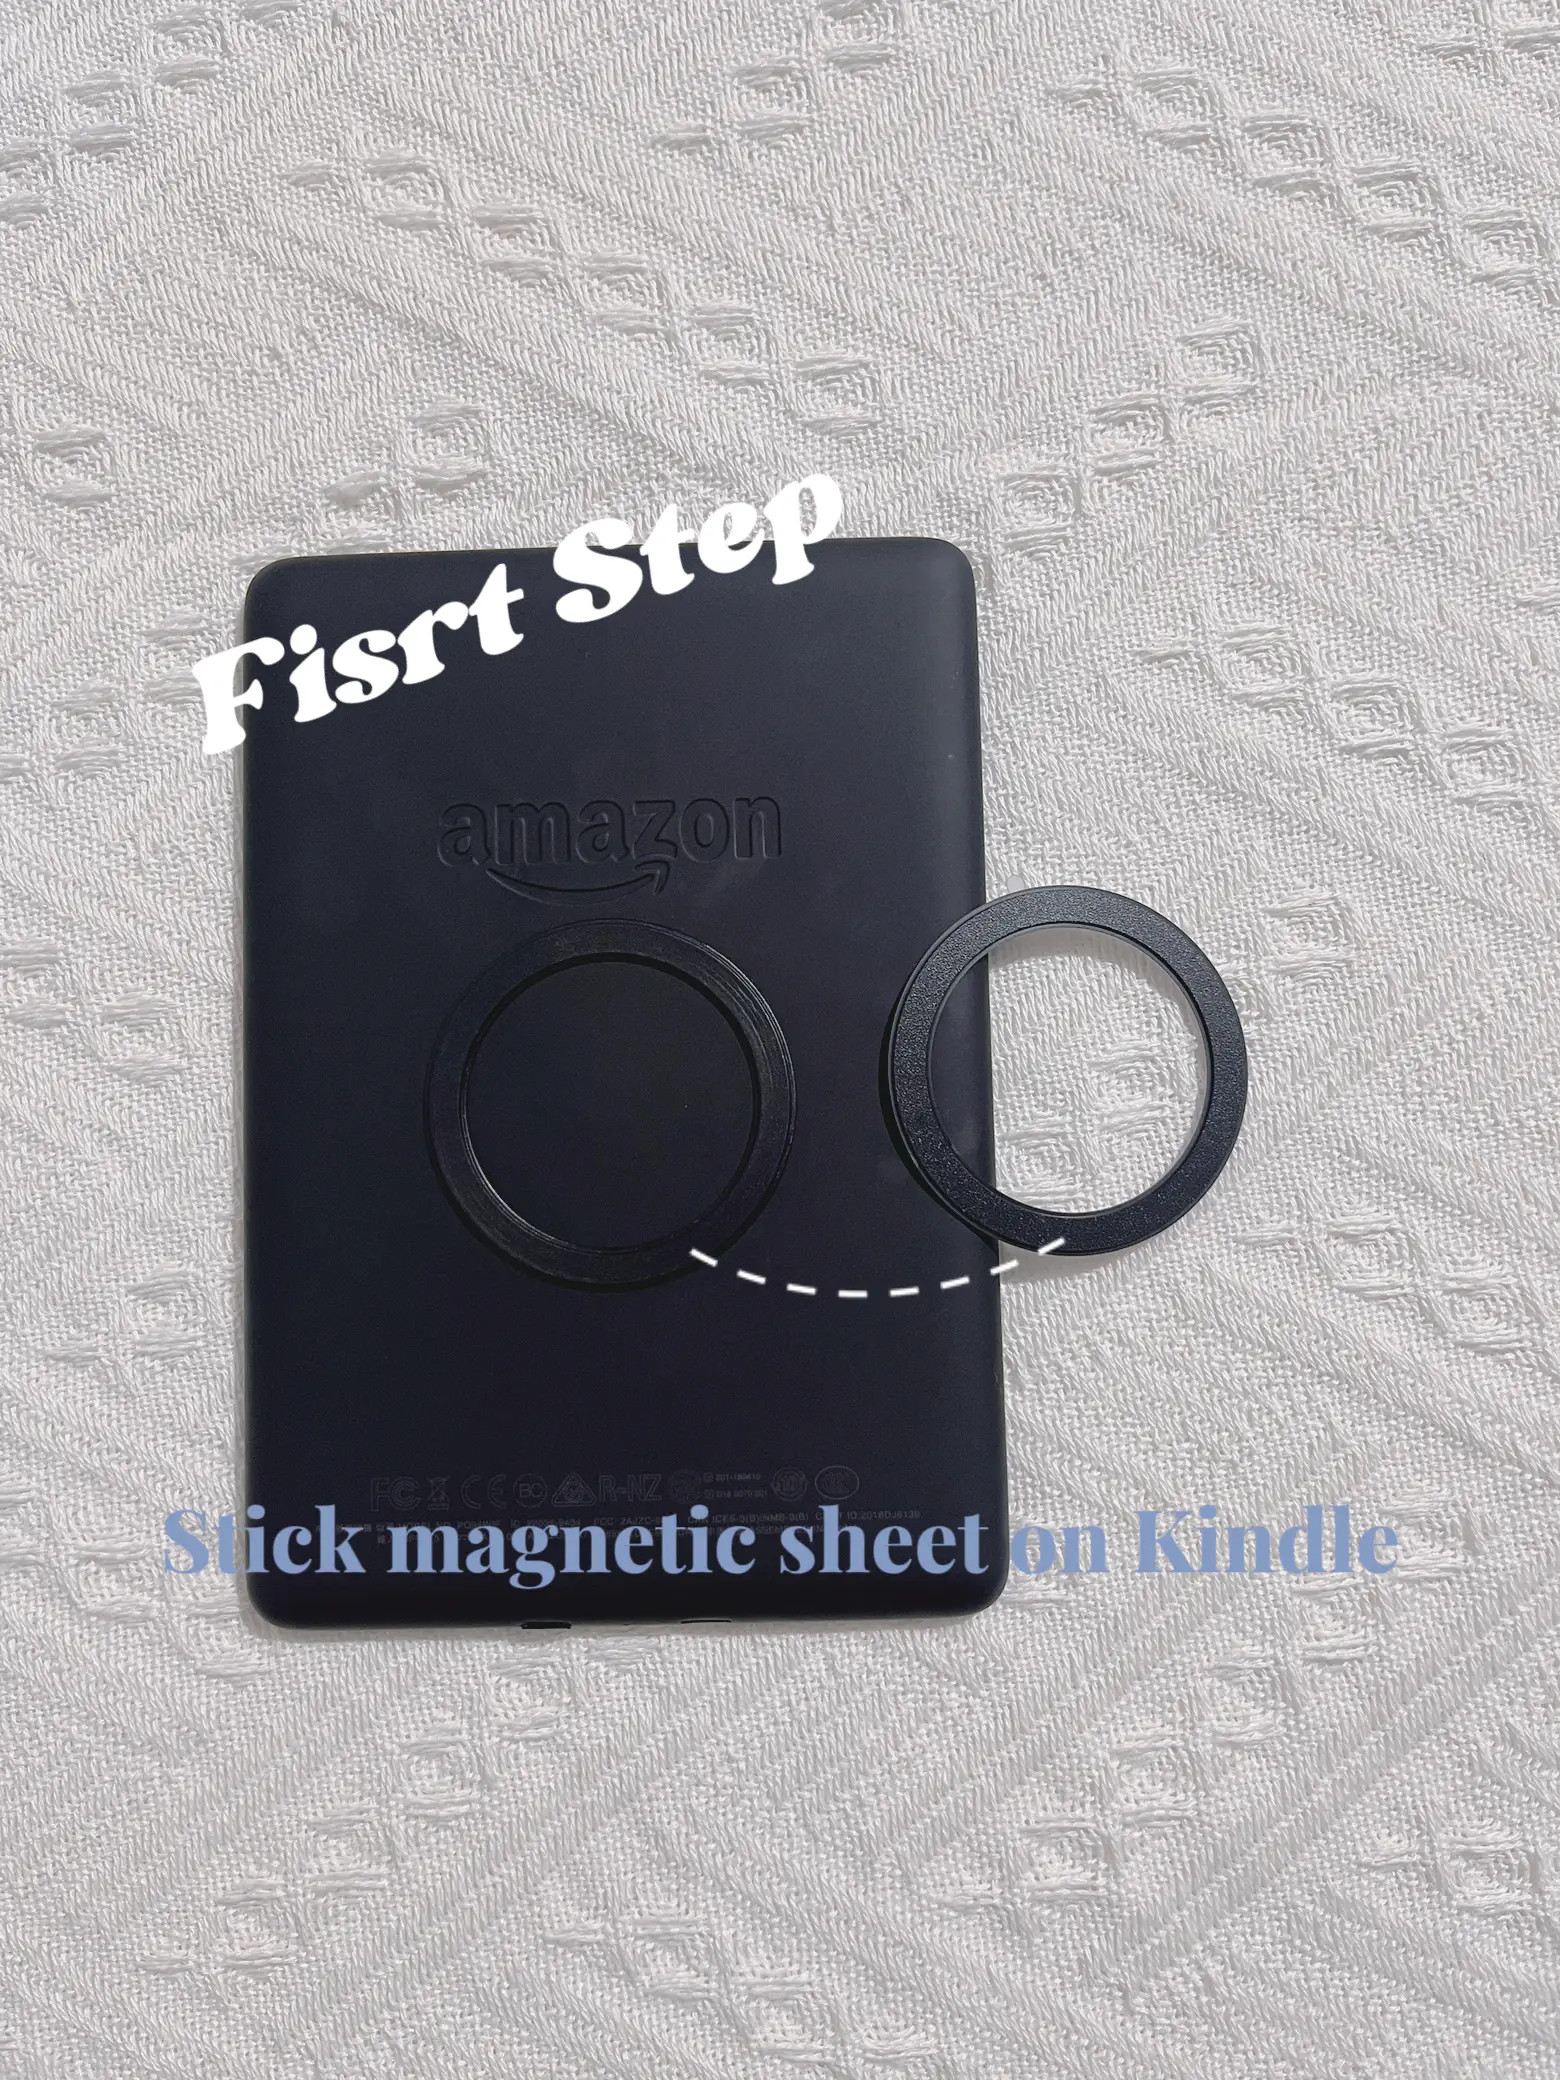 My first kindle! Sticker packs and MagSafe pop socket are godsend. : r/ kindle